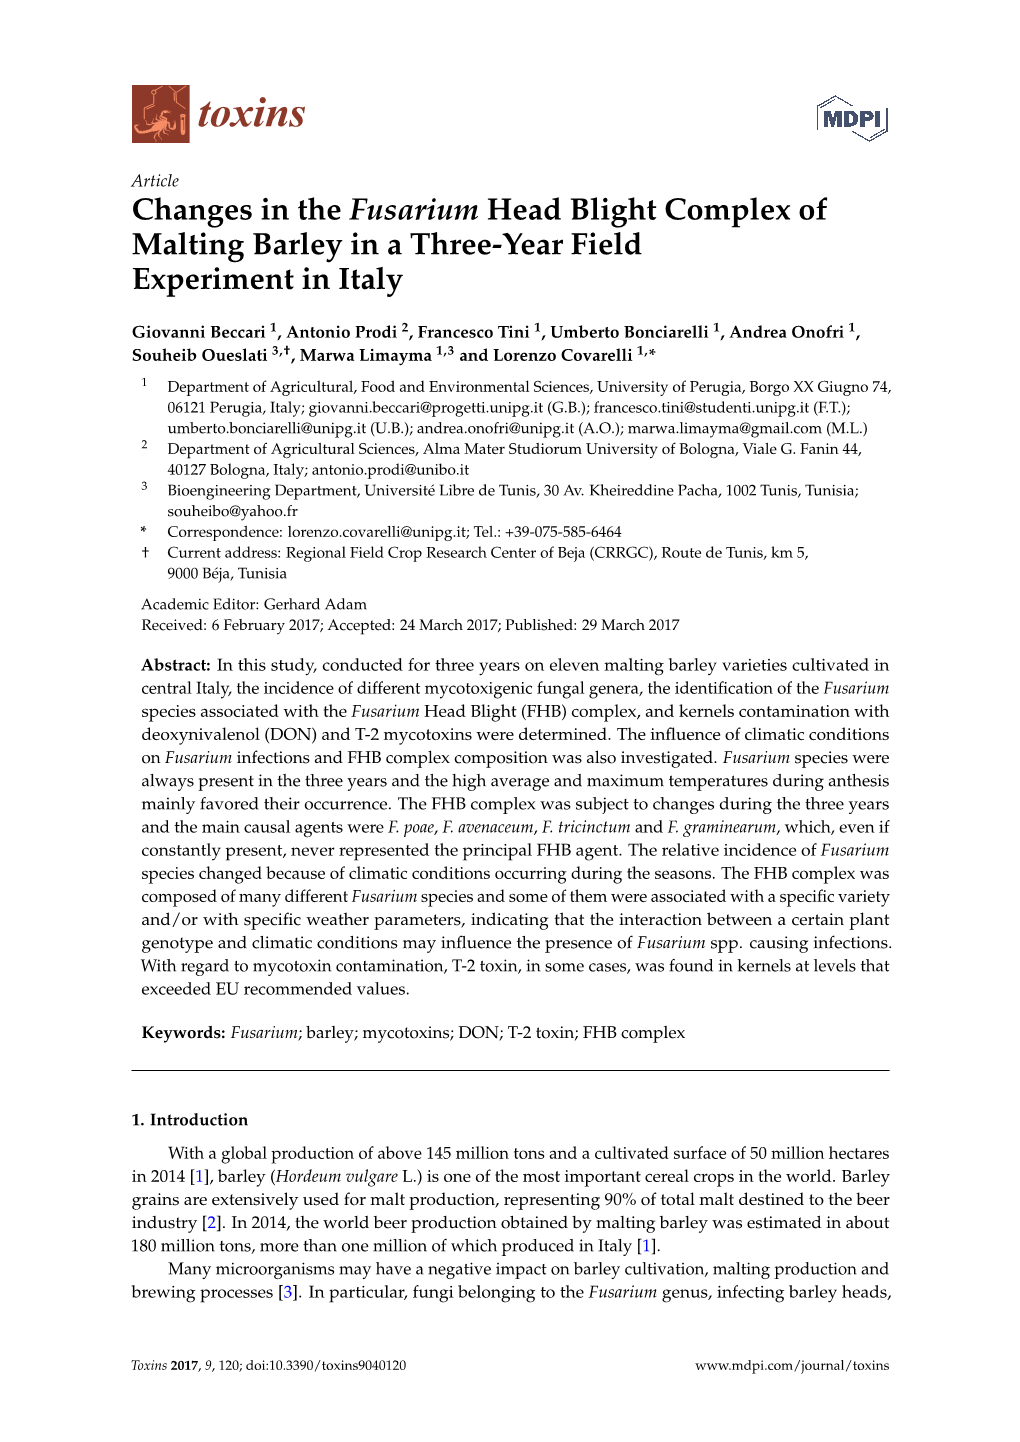 Changes in the Fusarium Head Blight Complex of Malting Barley in a Three-Year Field Experiment in Italy